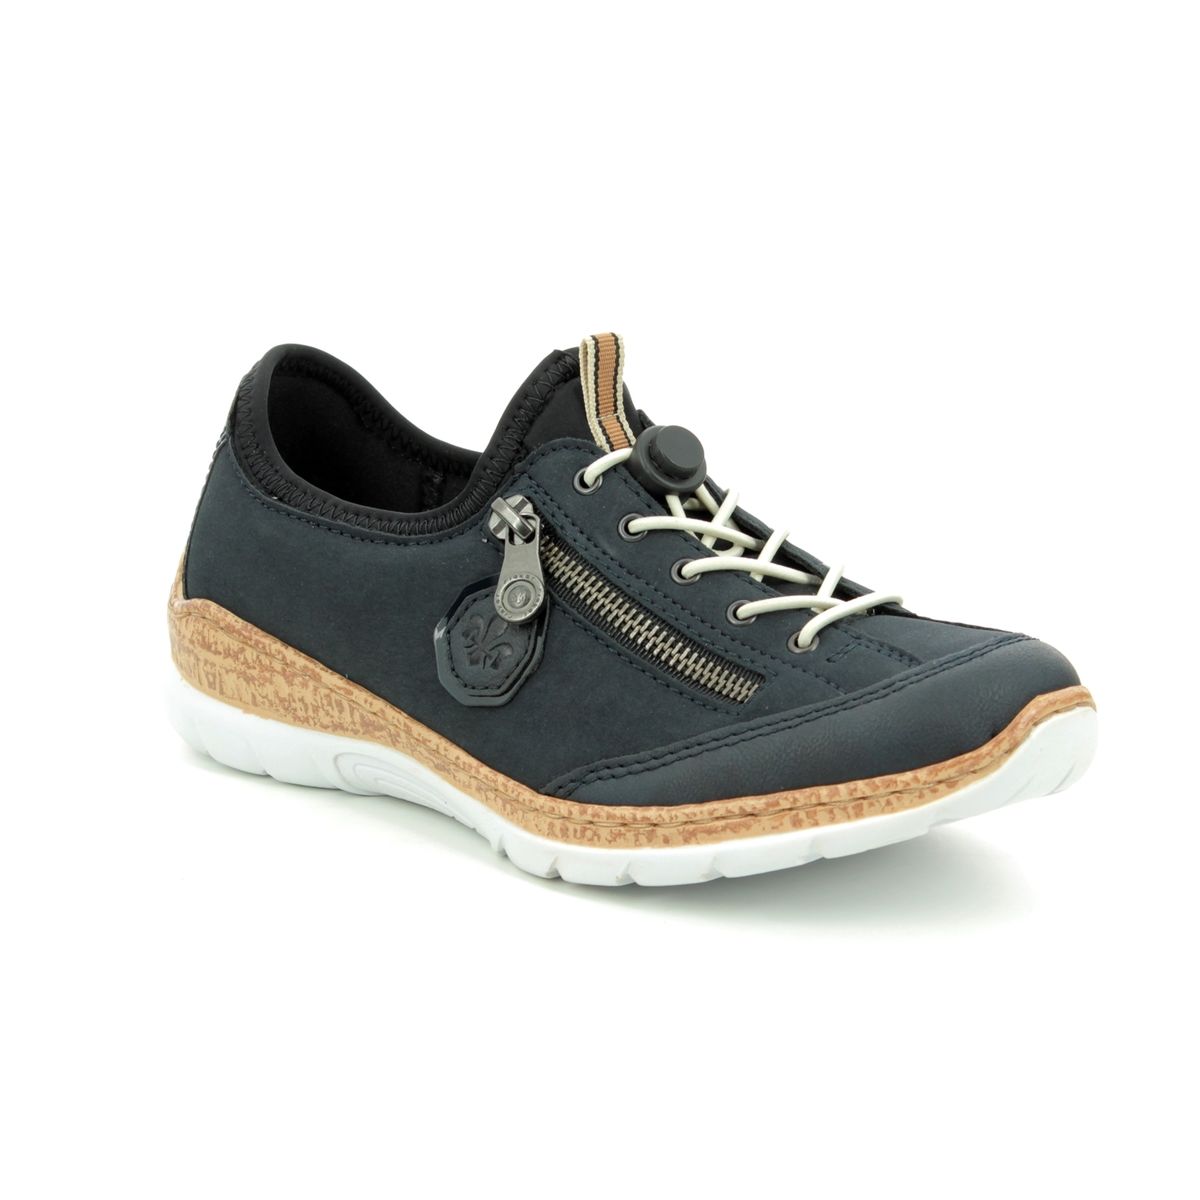 Rieker Empirico Navy Womens Lacing Shoes N4263-14 In Size 38 In Plain Navy